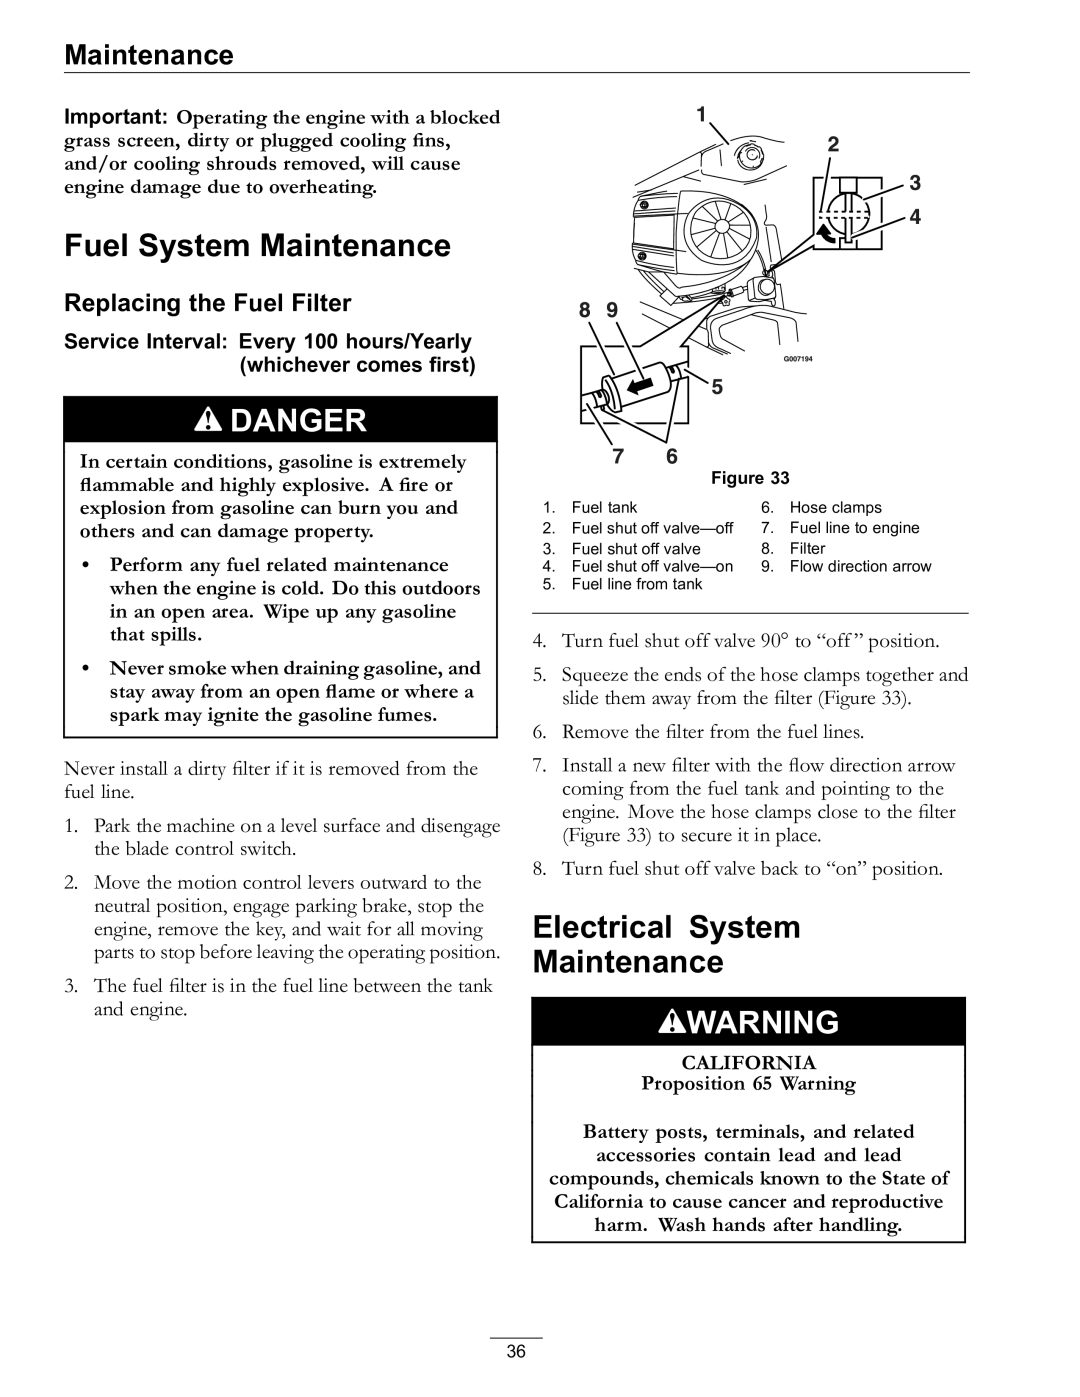 Exmark Lawn Mower manual Fuel System Maintenance, Electrical System Maintenance, Replacing the Fuel Filter 